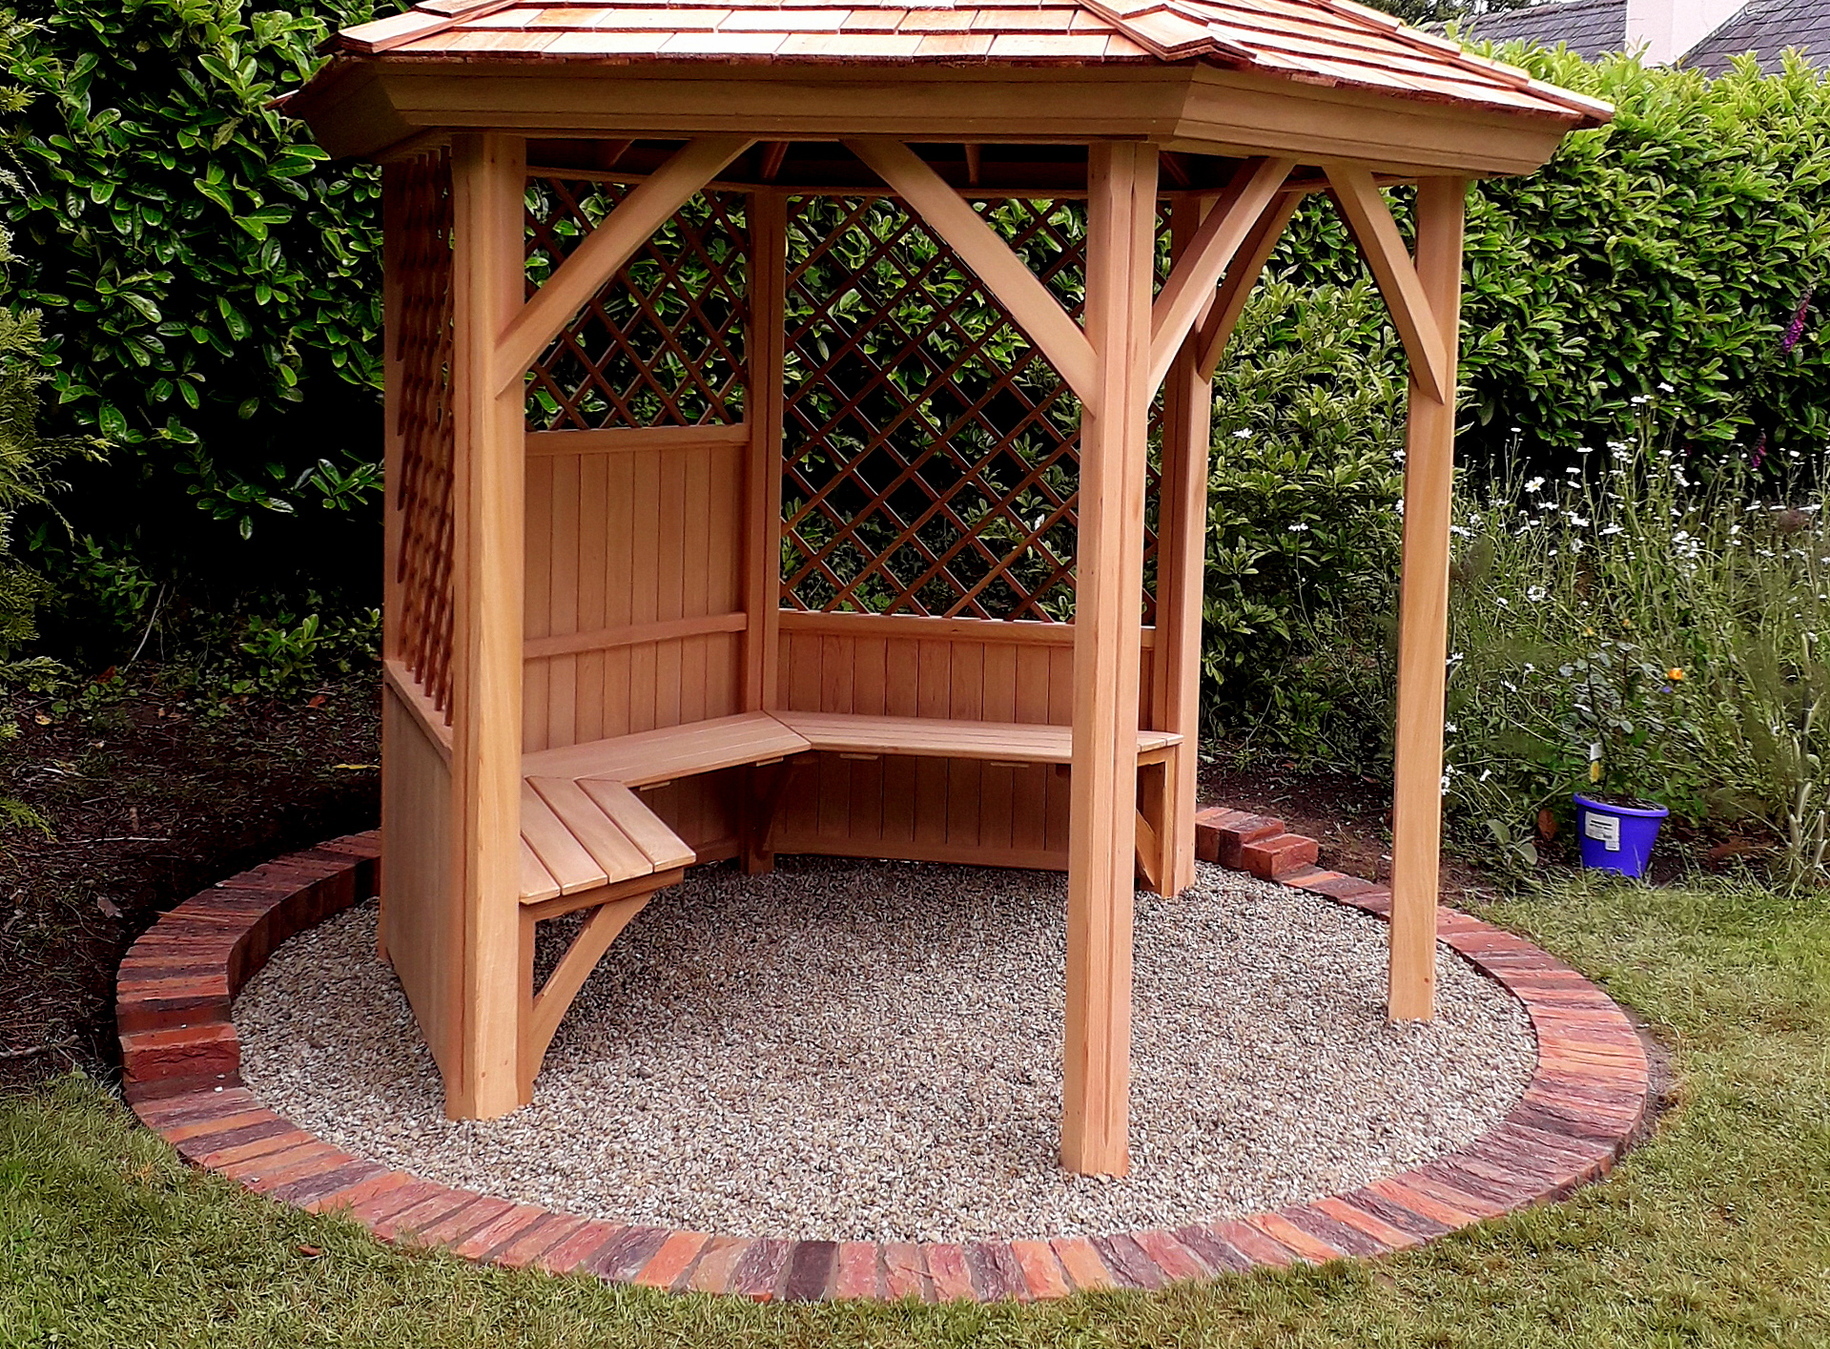 A stunning 2.4m six-sided Garden Gazebo by Victorian Garden Buildings, exceptionally well made in Western Red Cedar, with optional cedar bench. Supplied + Fitted by Owen Chubb Garden Landscapes Limited, in Kilbride, Co Wicklow.